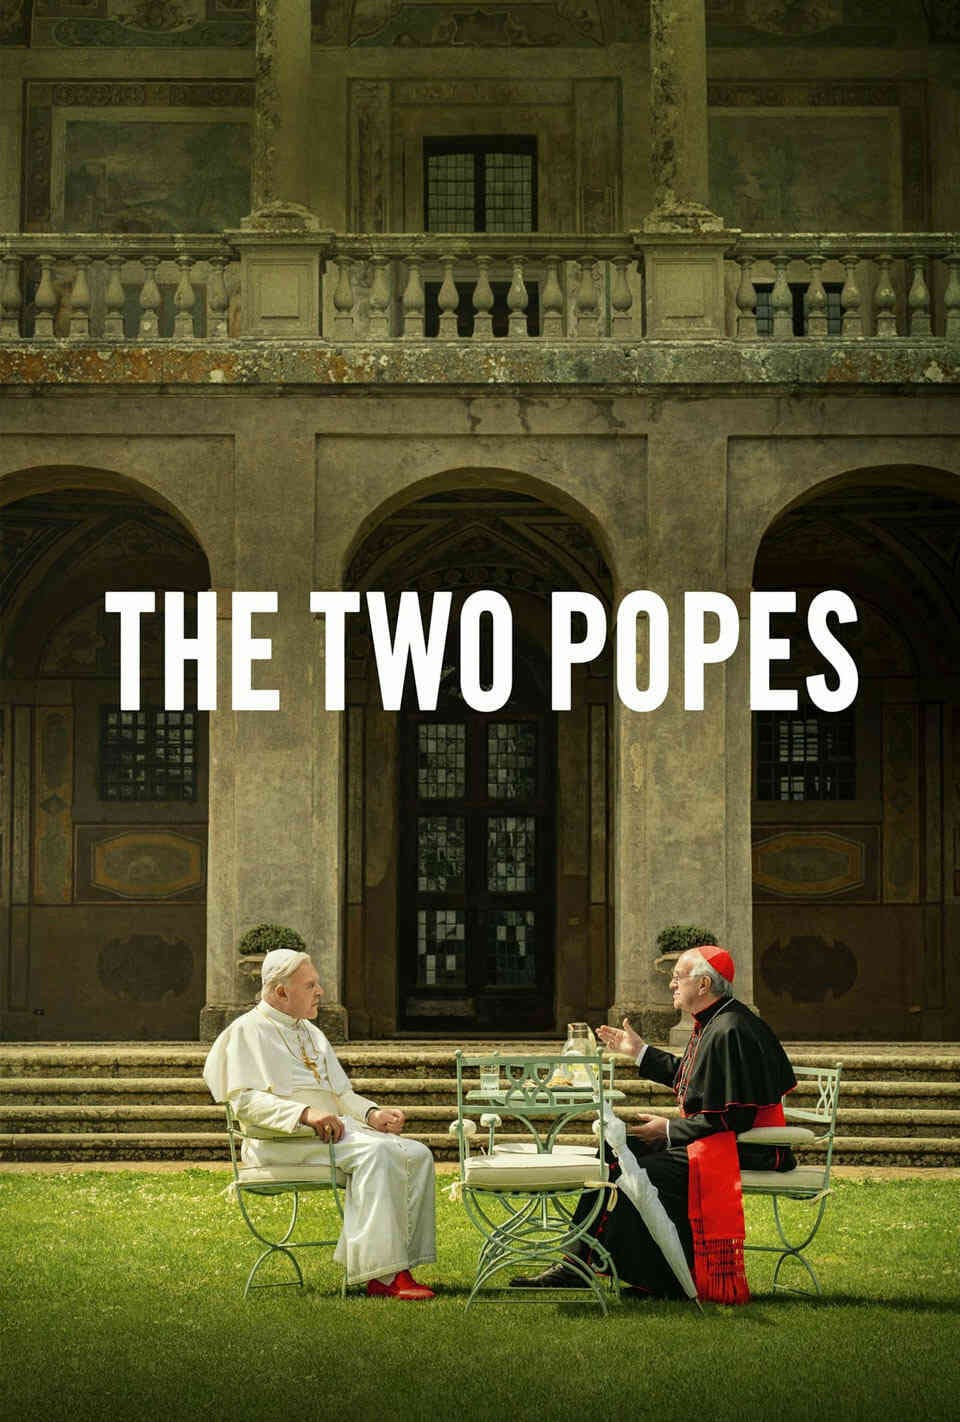 Read The Two Popes screenplay (poster)